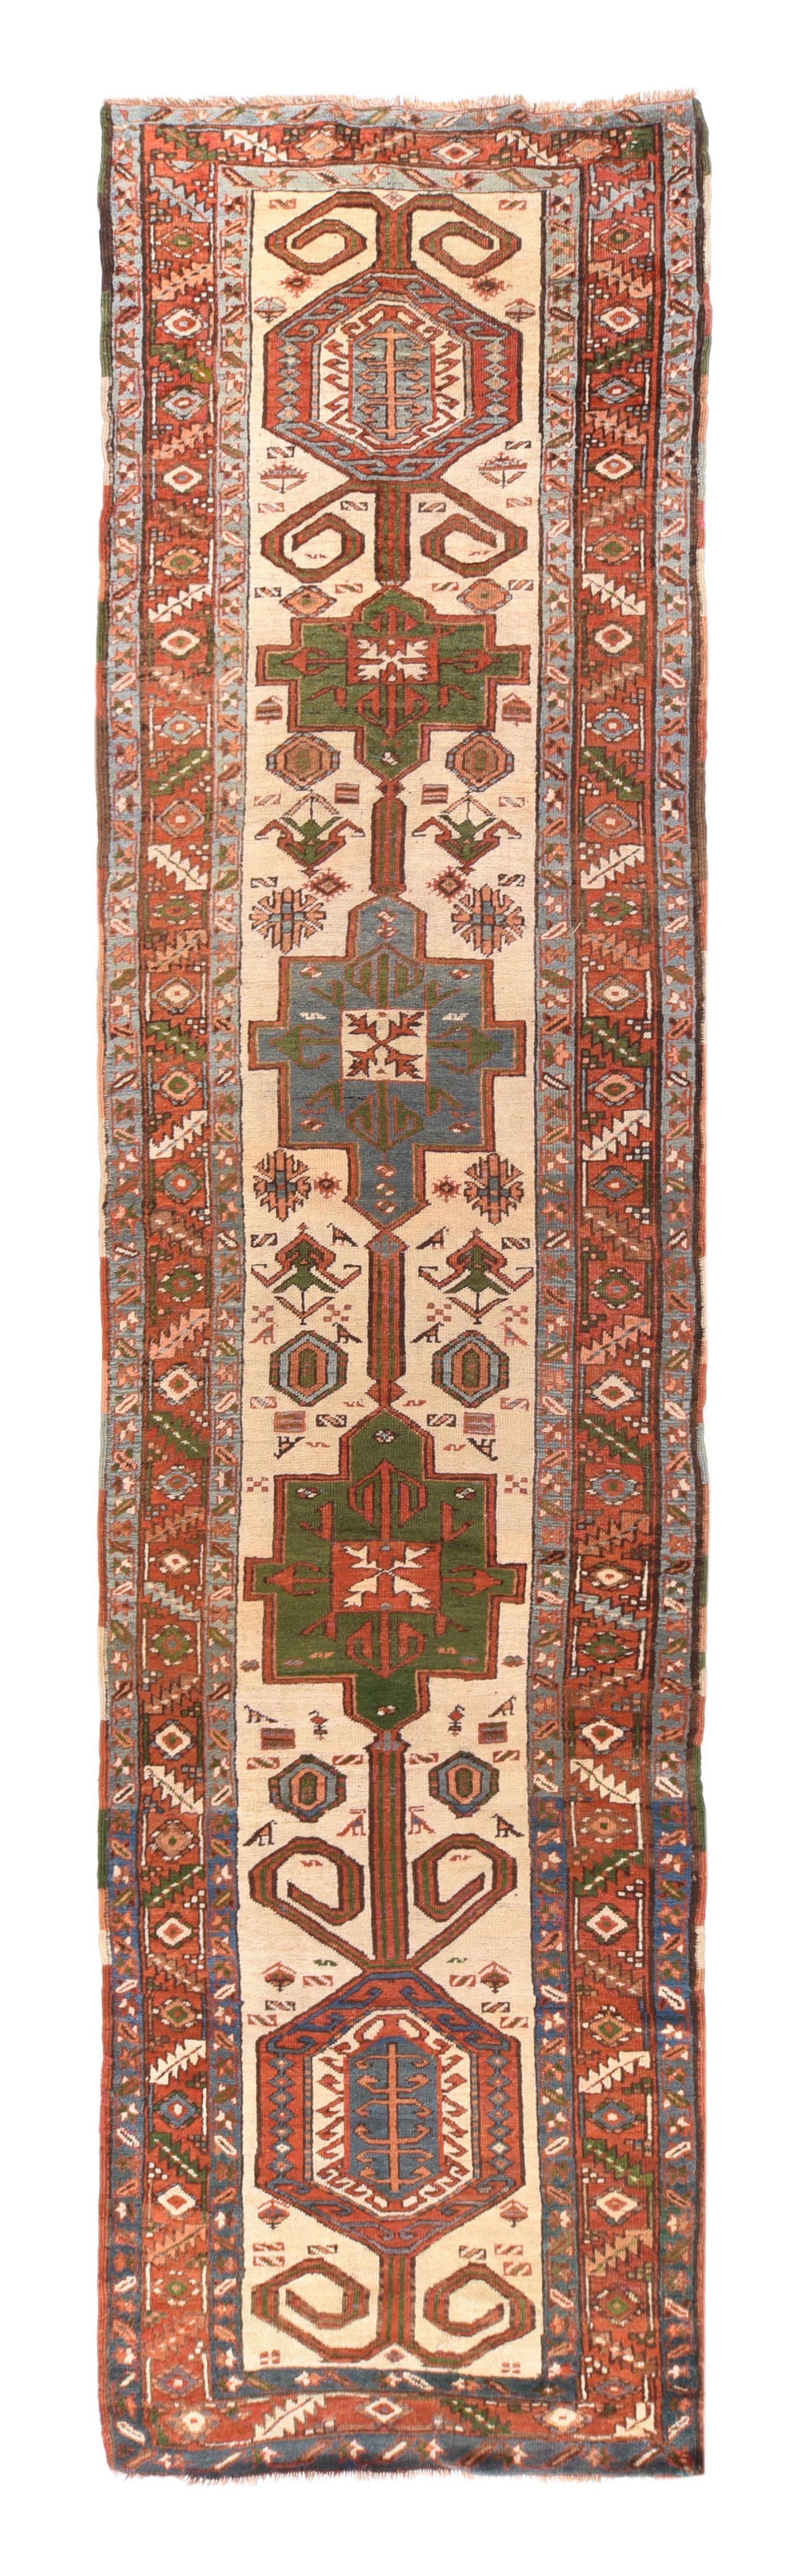 Antique Bakshayesh Rug 3'4'' x 14'0'' In Excellent Condition For Sale In New York, NY